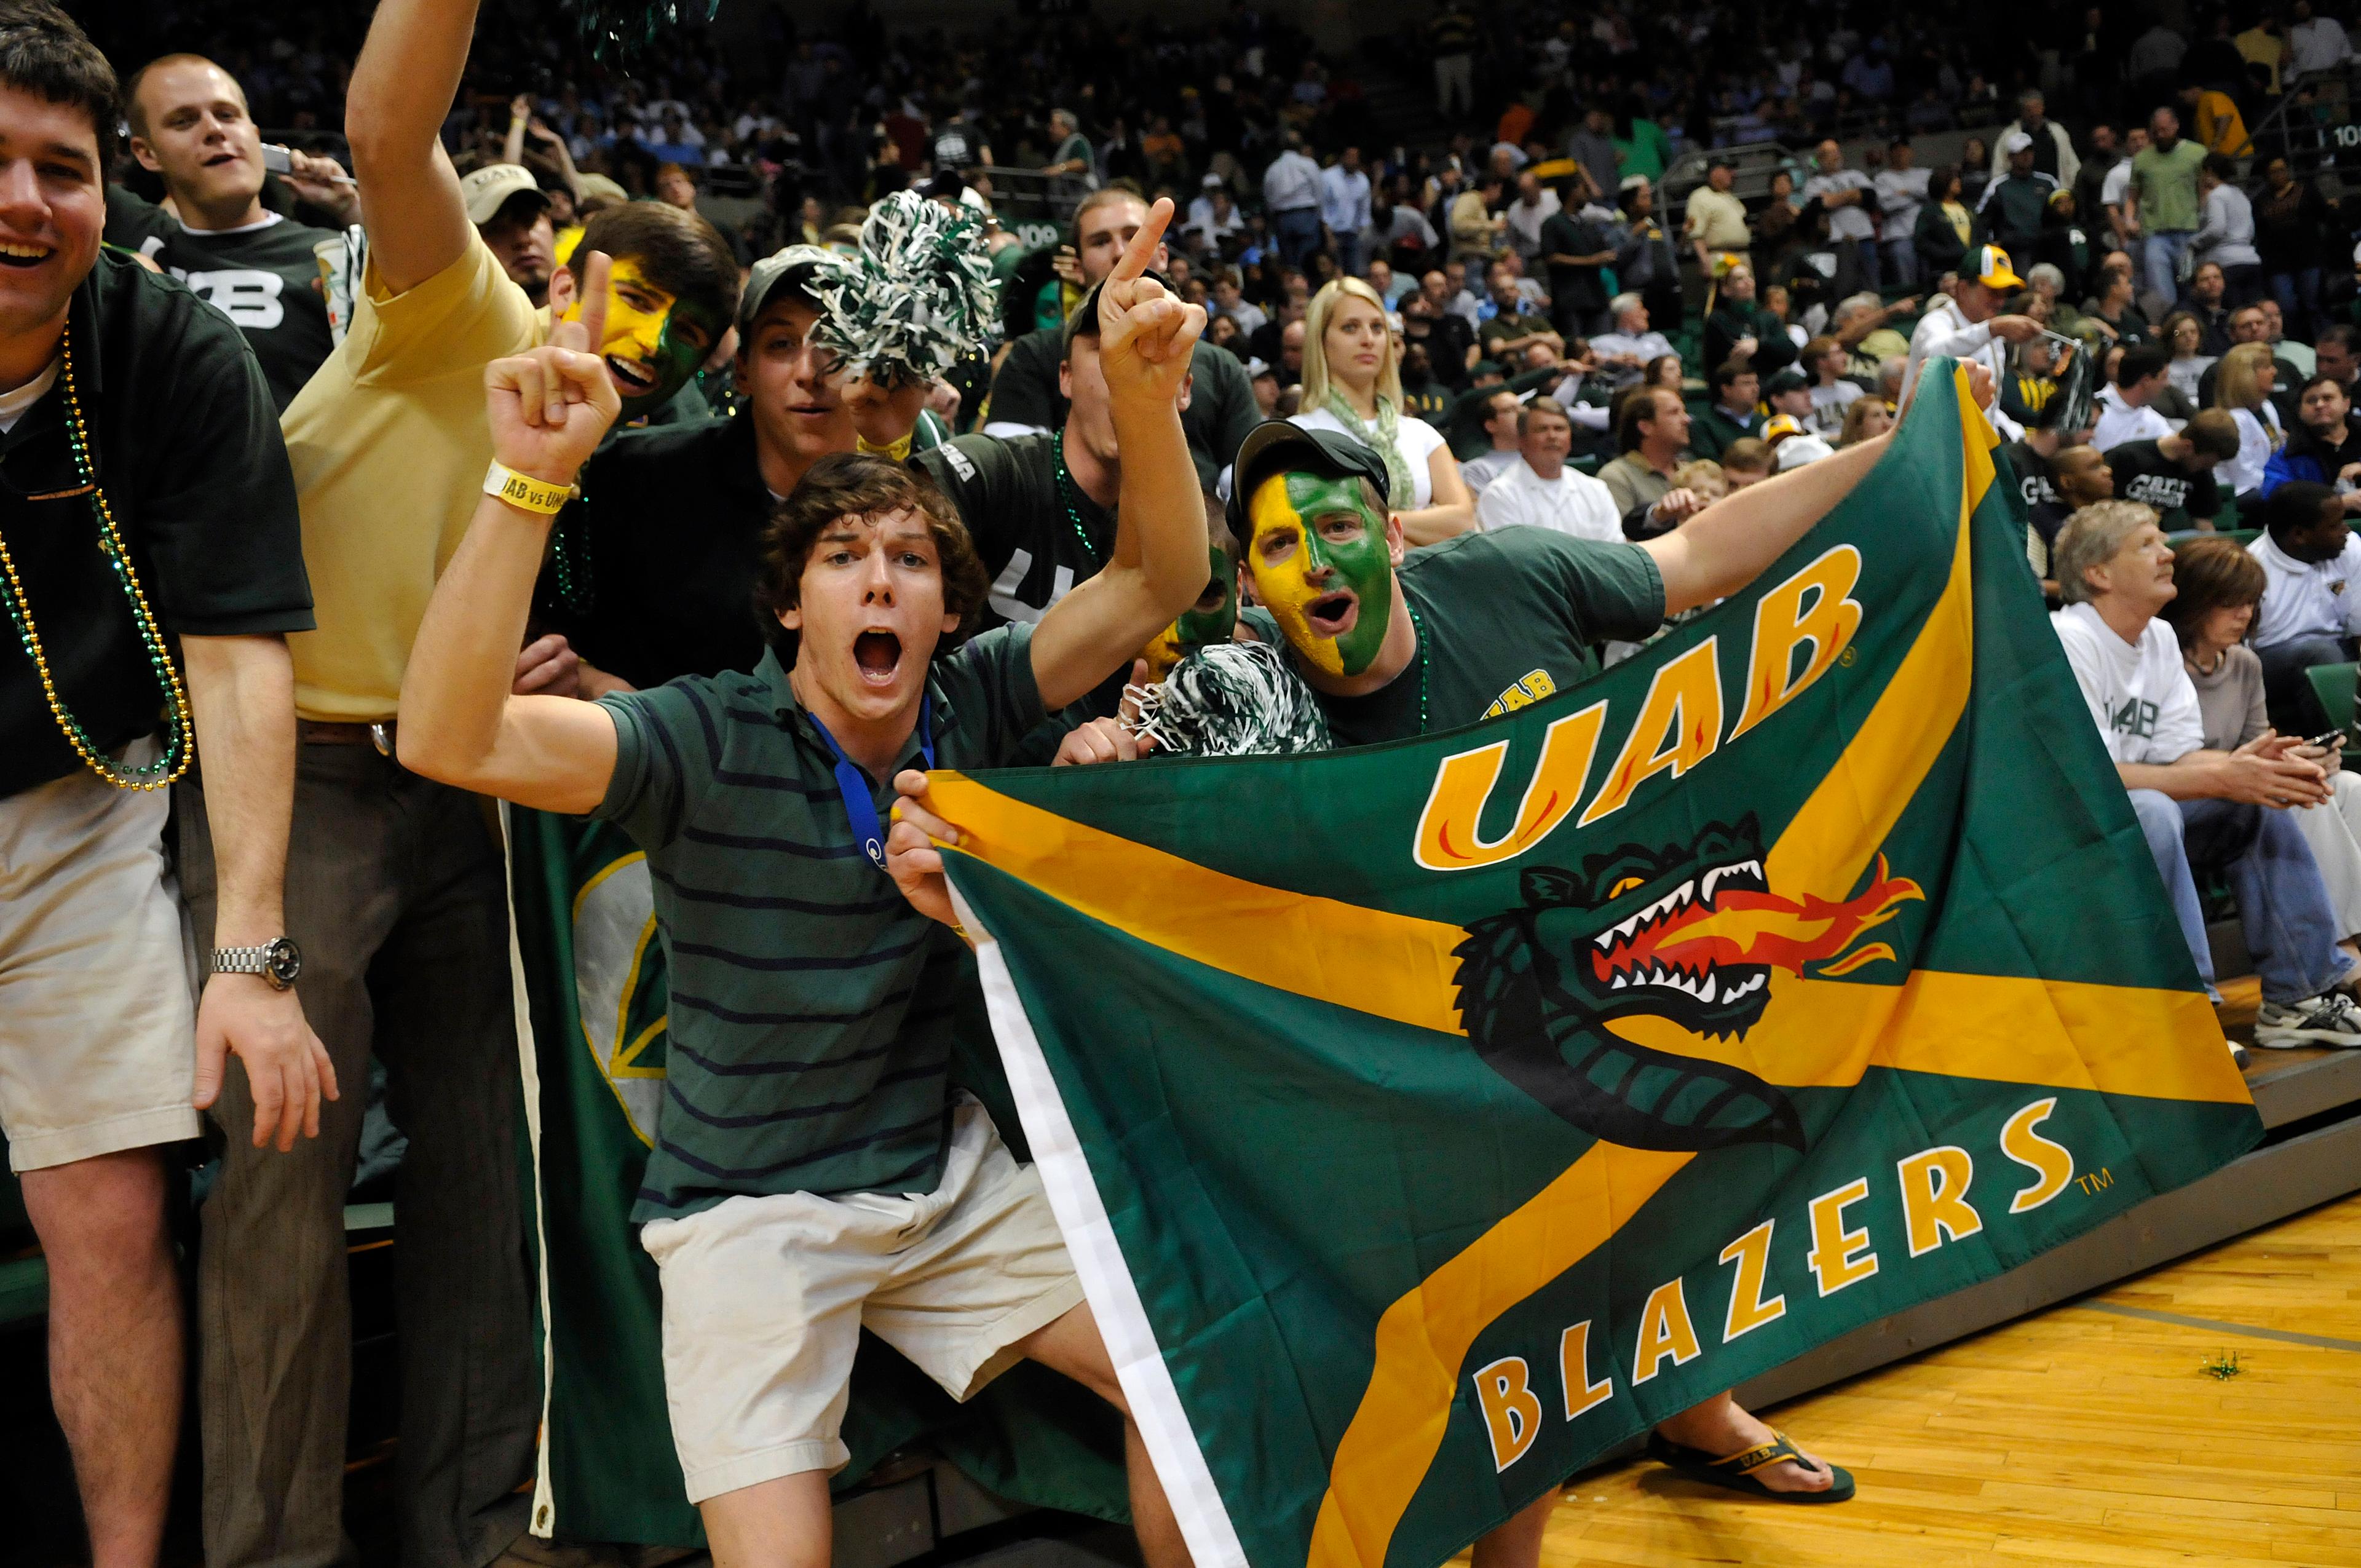 INTO UAB cheering crowd at a school event showing school flag_28388.jpg